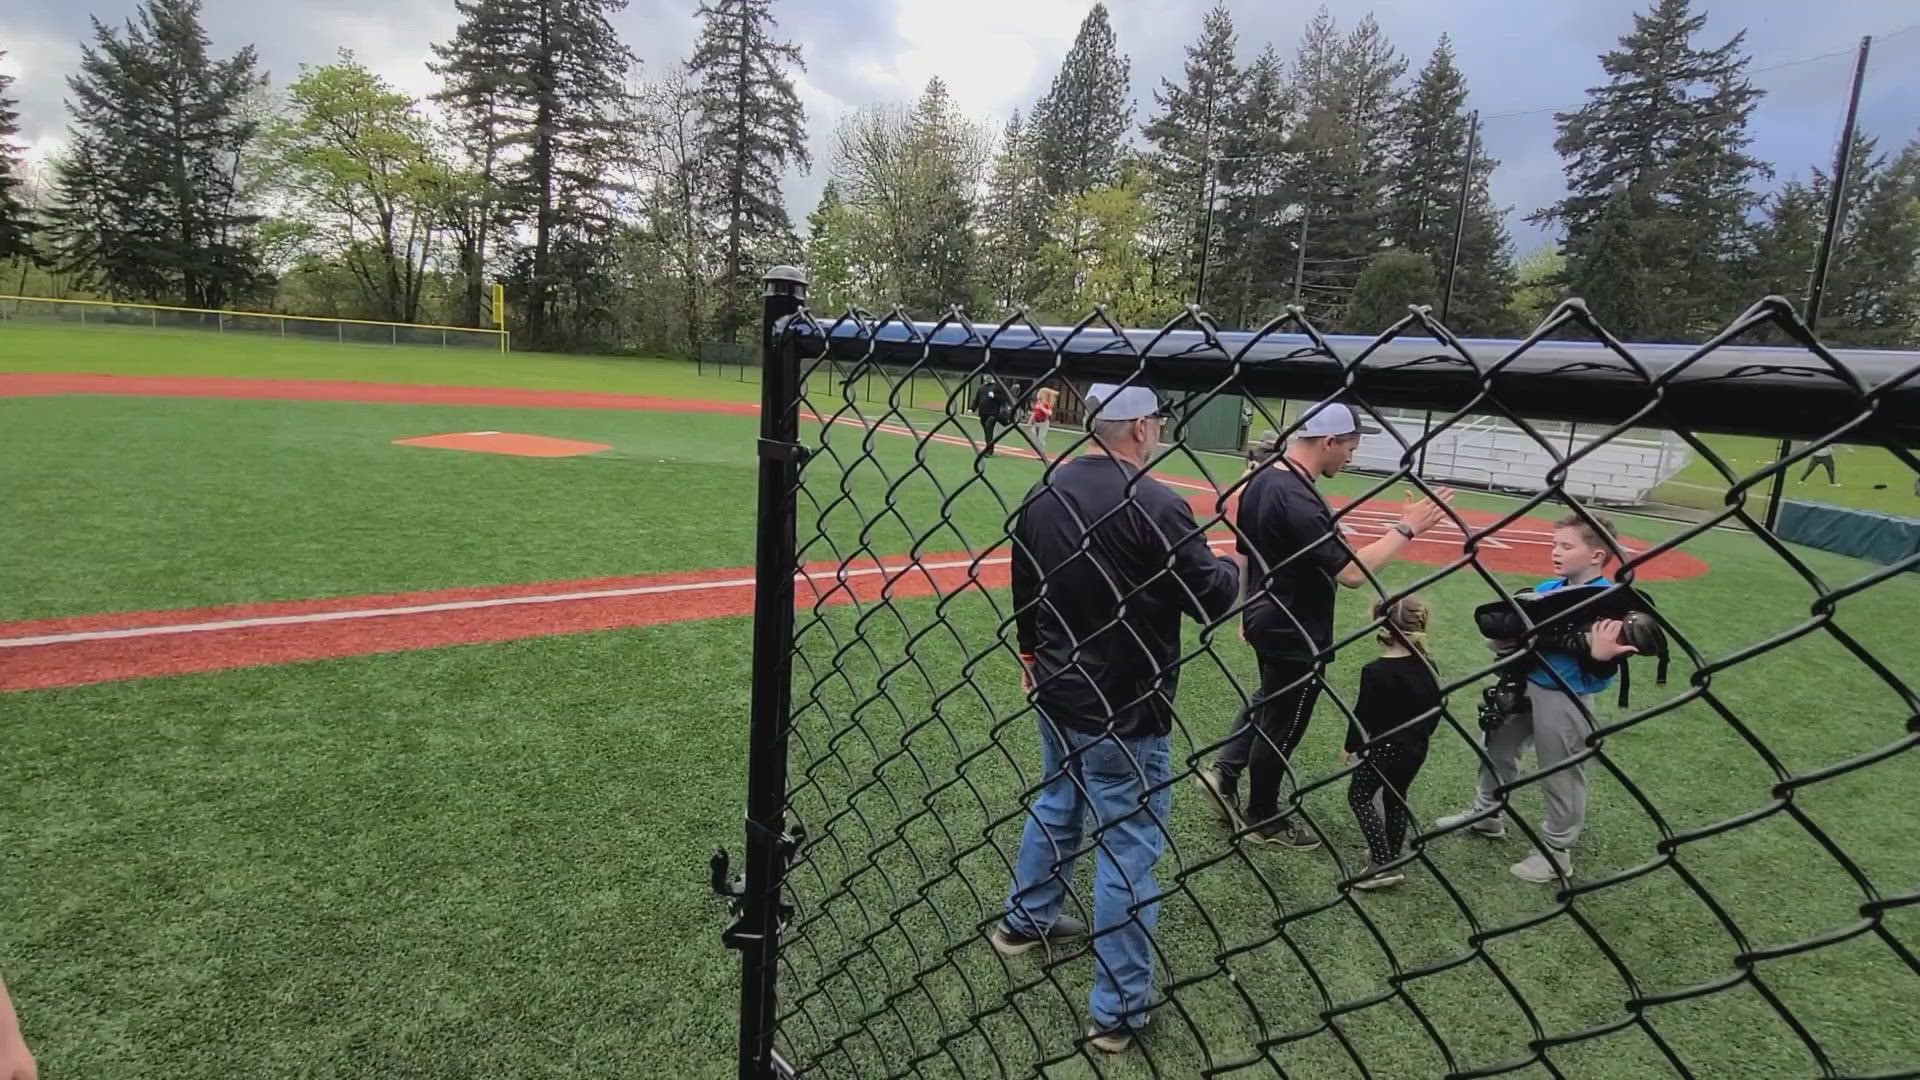 A gustnado tore the roof off a baseball dugout and sent it flying toward kids at a kids' baseball game at Cook Park in Tigard on April 30, 2022.